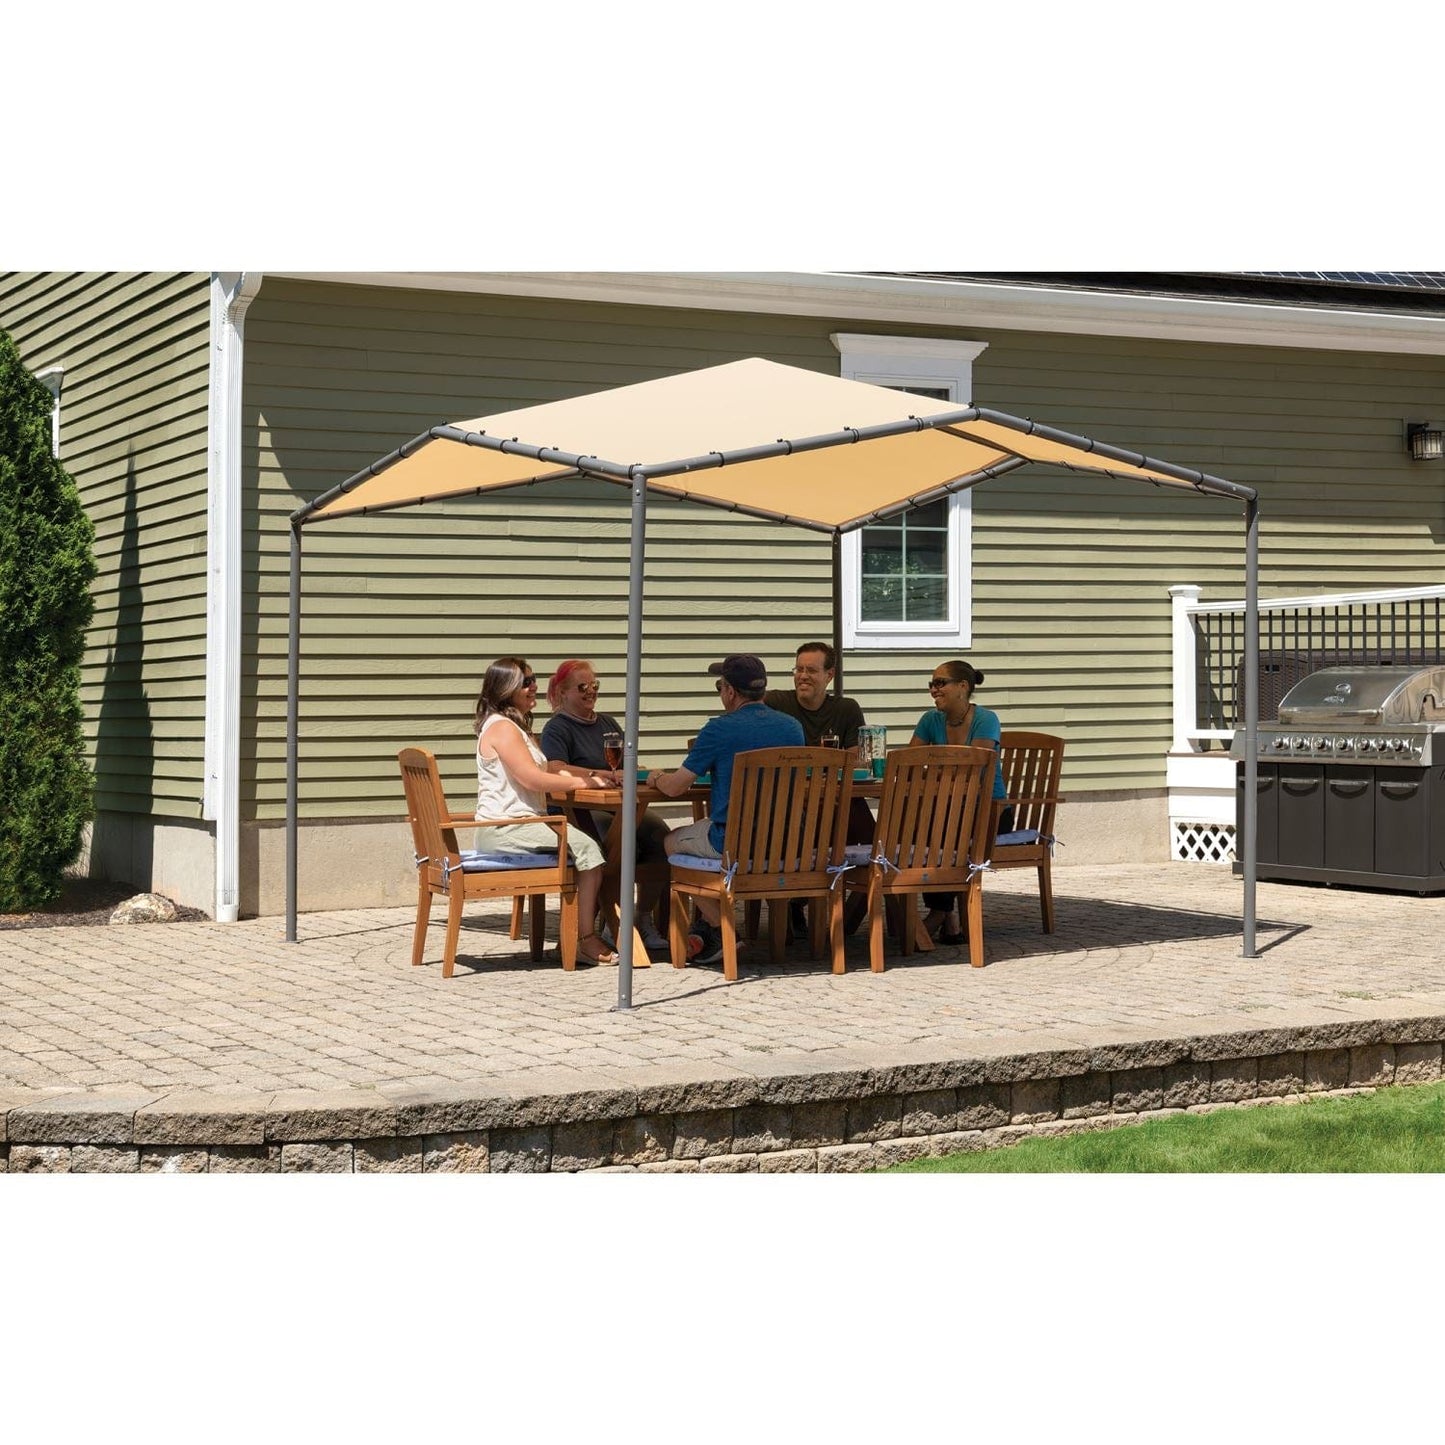 ShelterLogic Canopies ShelterLogic | 10x10 Pacifica Gazebo Canopy Charcoal Frame and Marzipan Tan Cover 22512